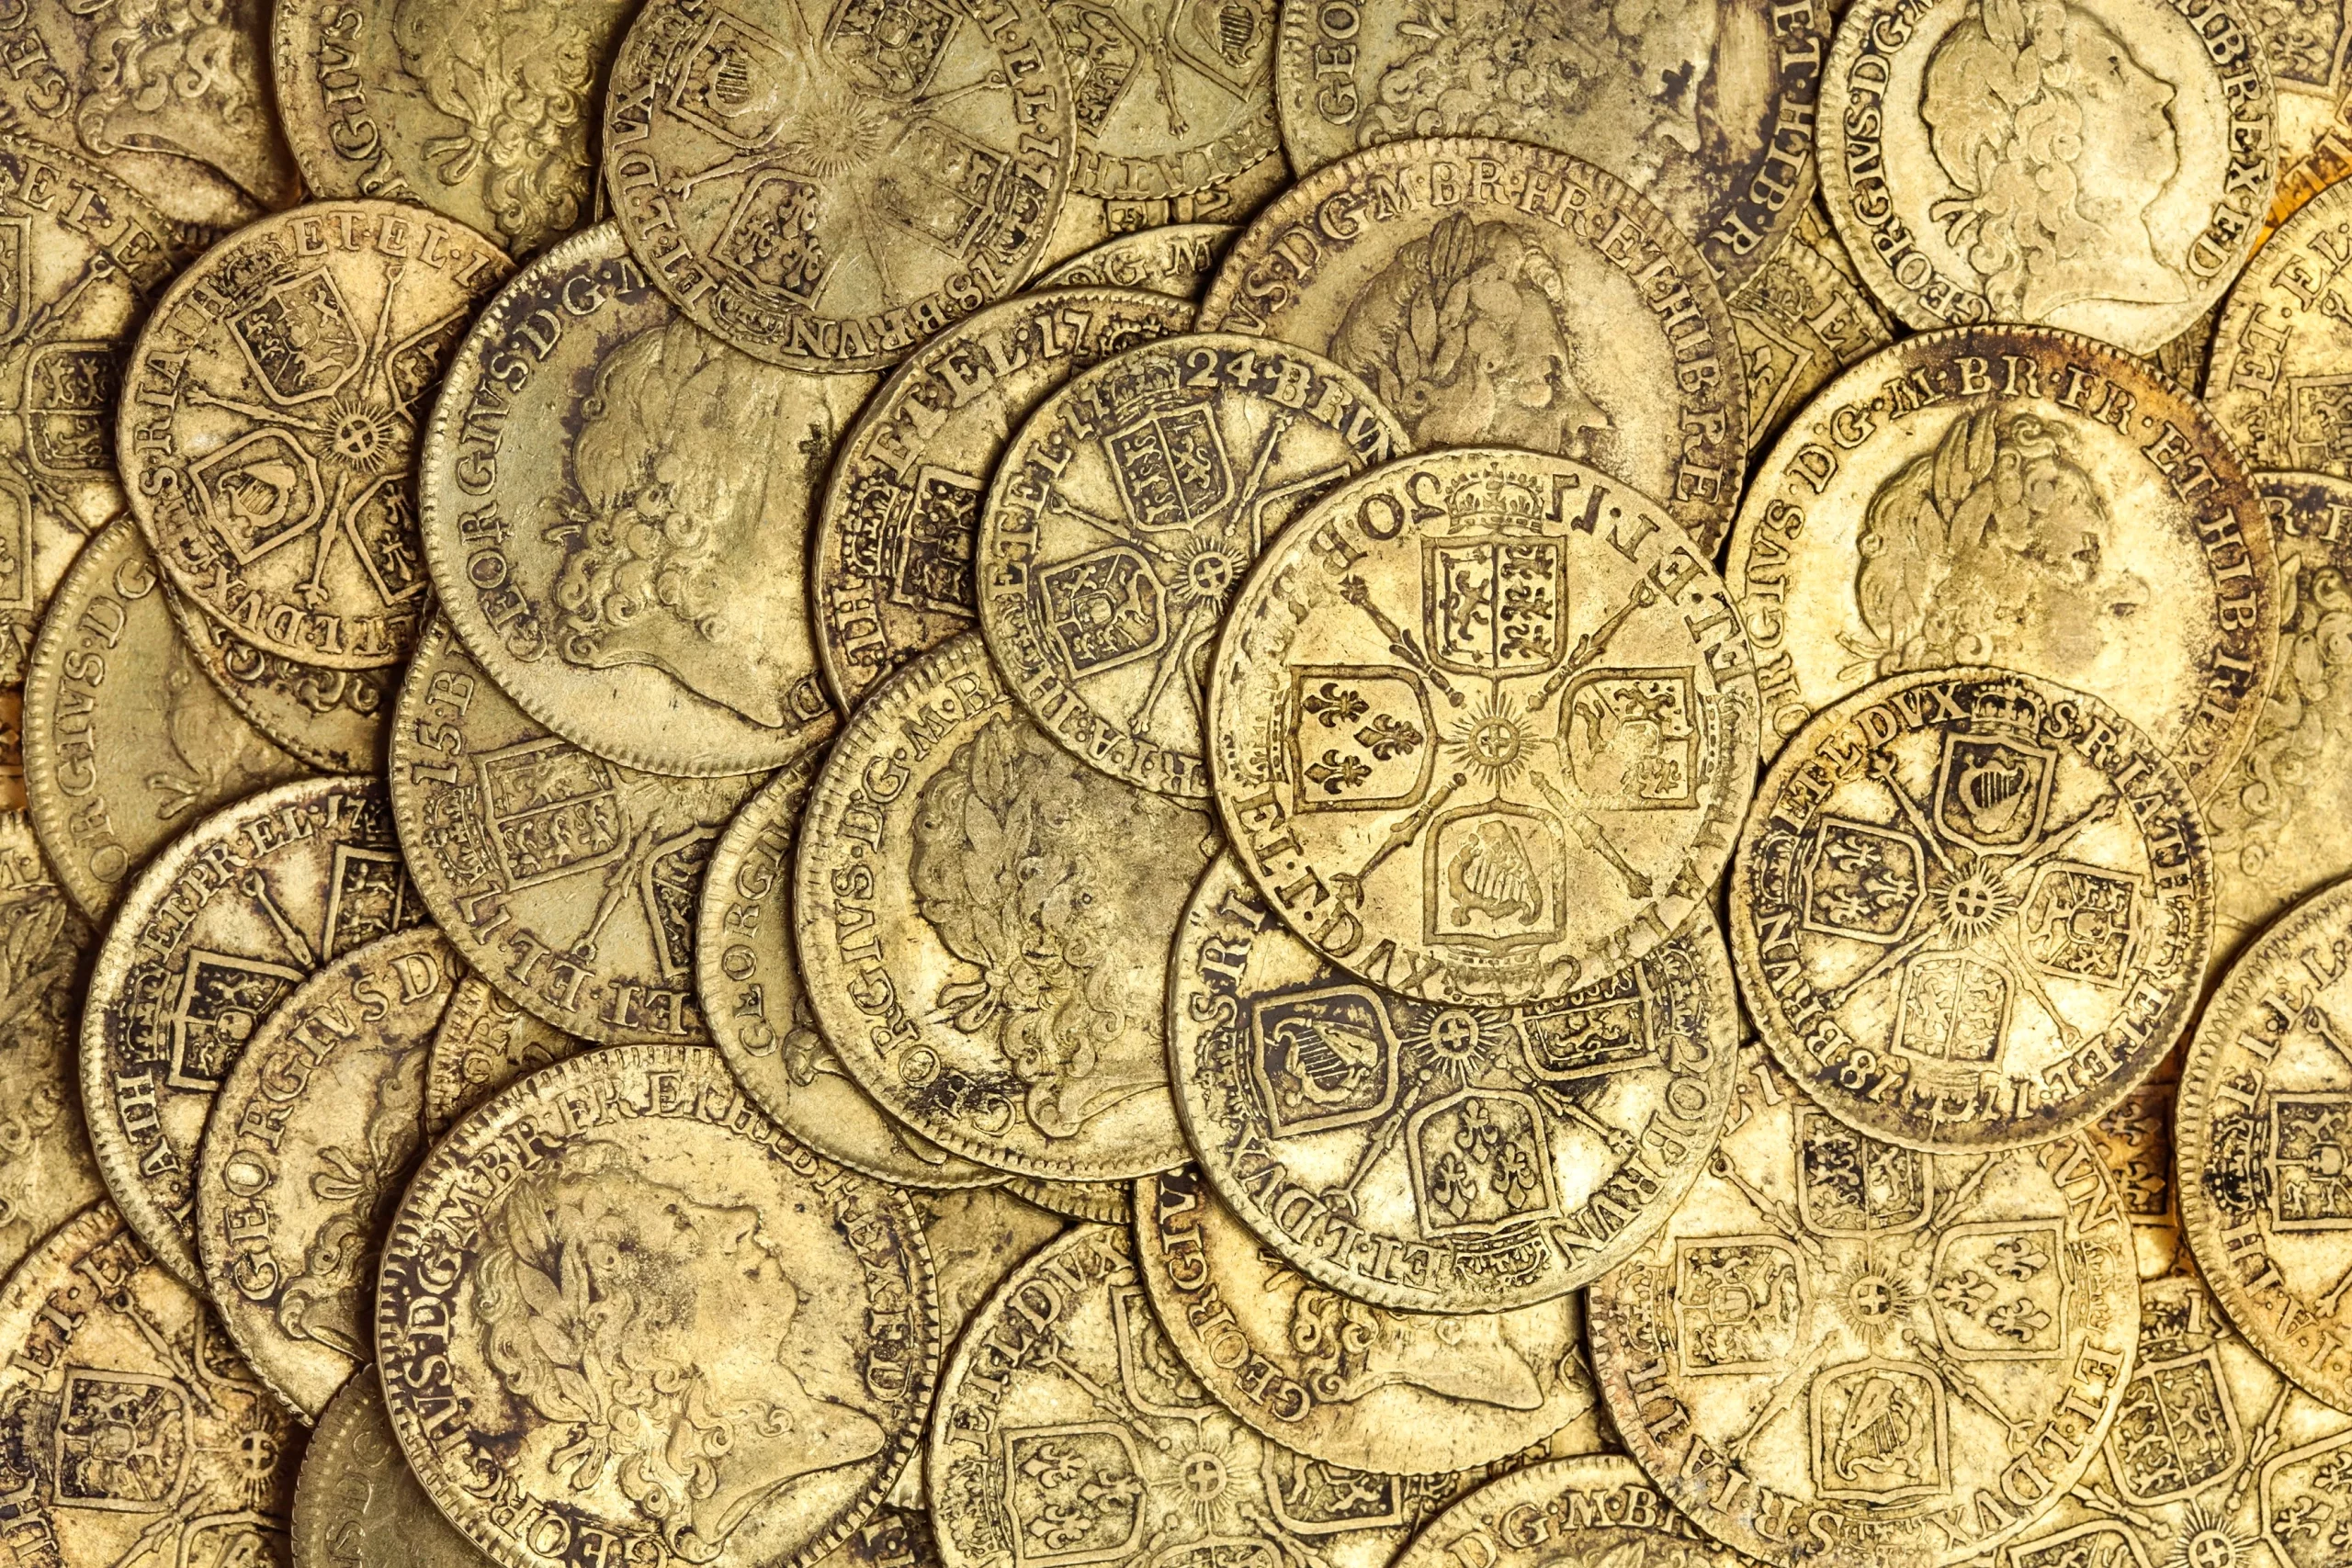 5. Gold Coins